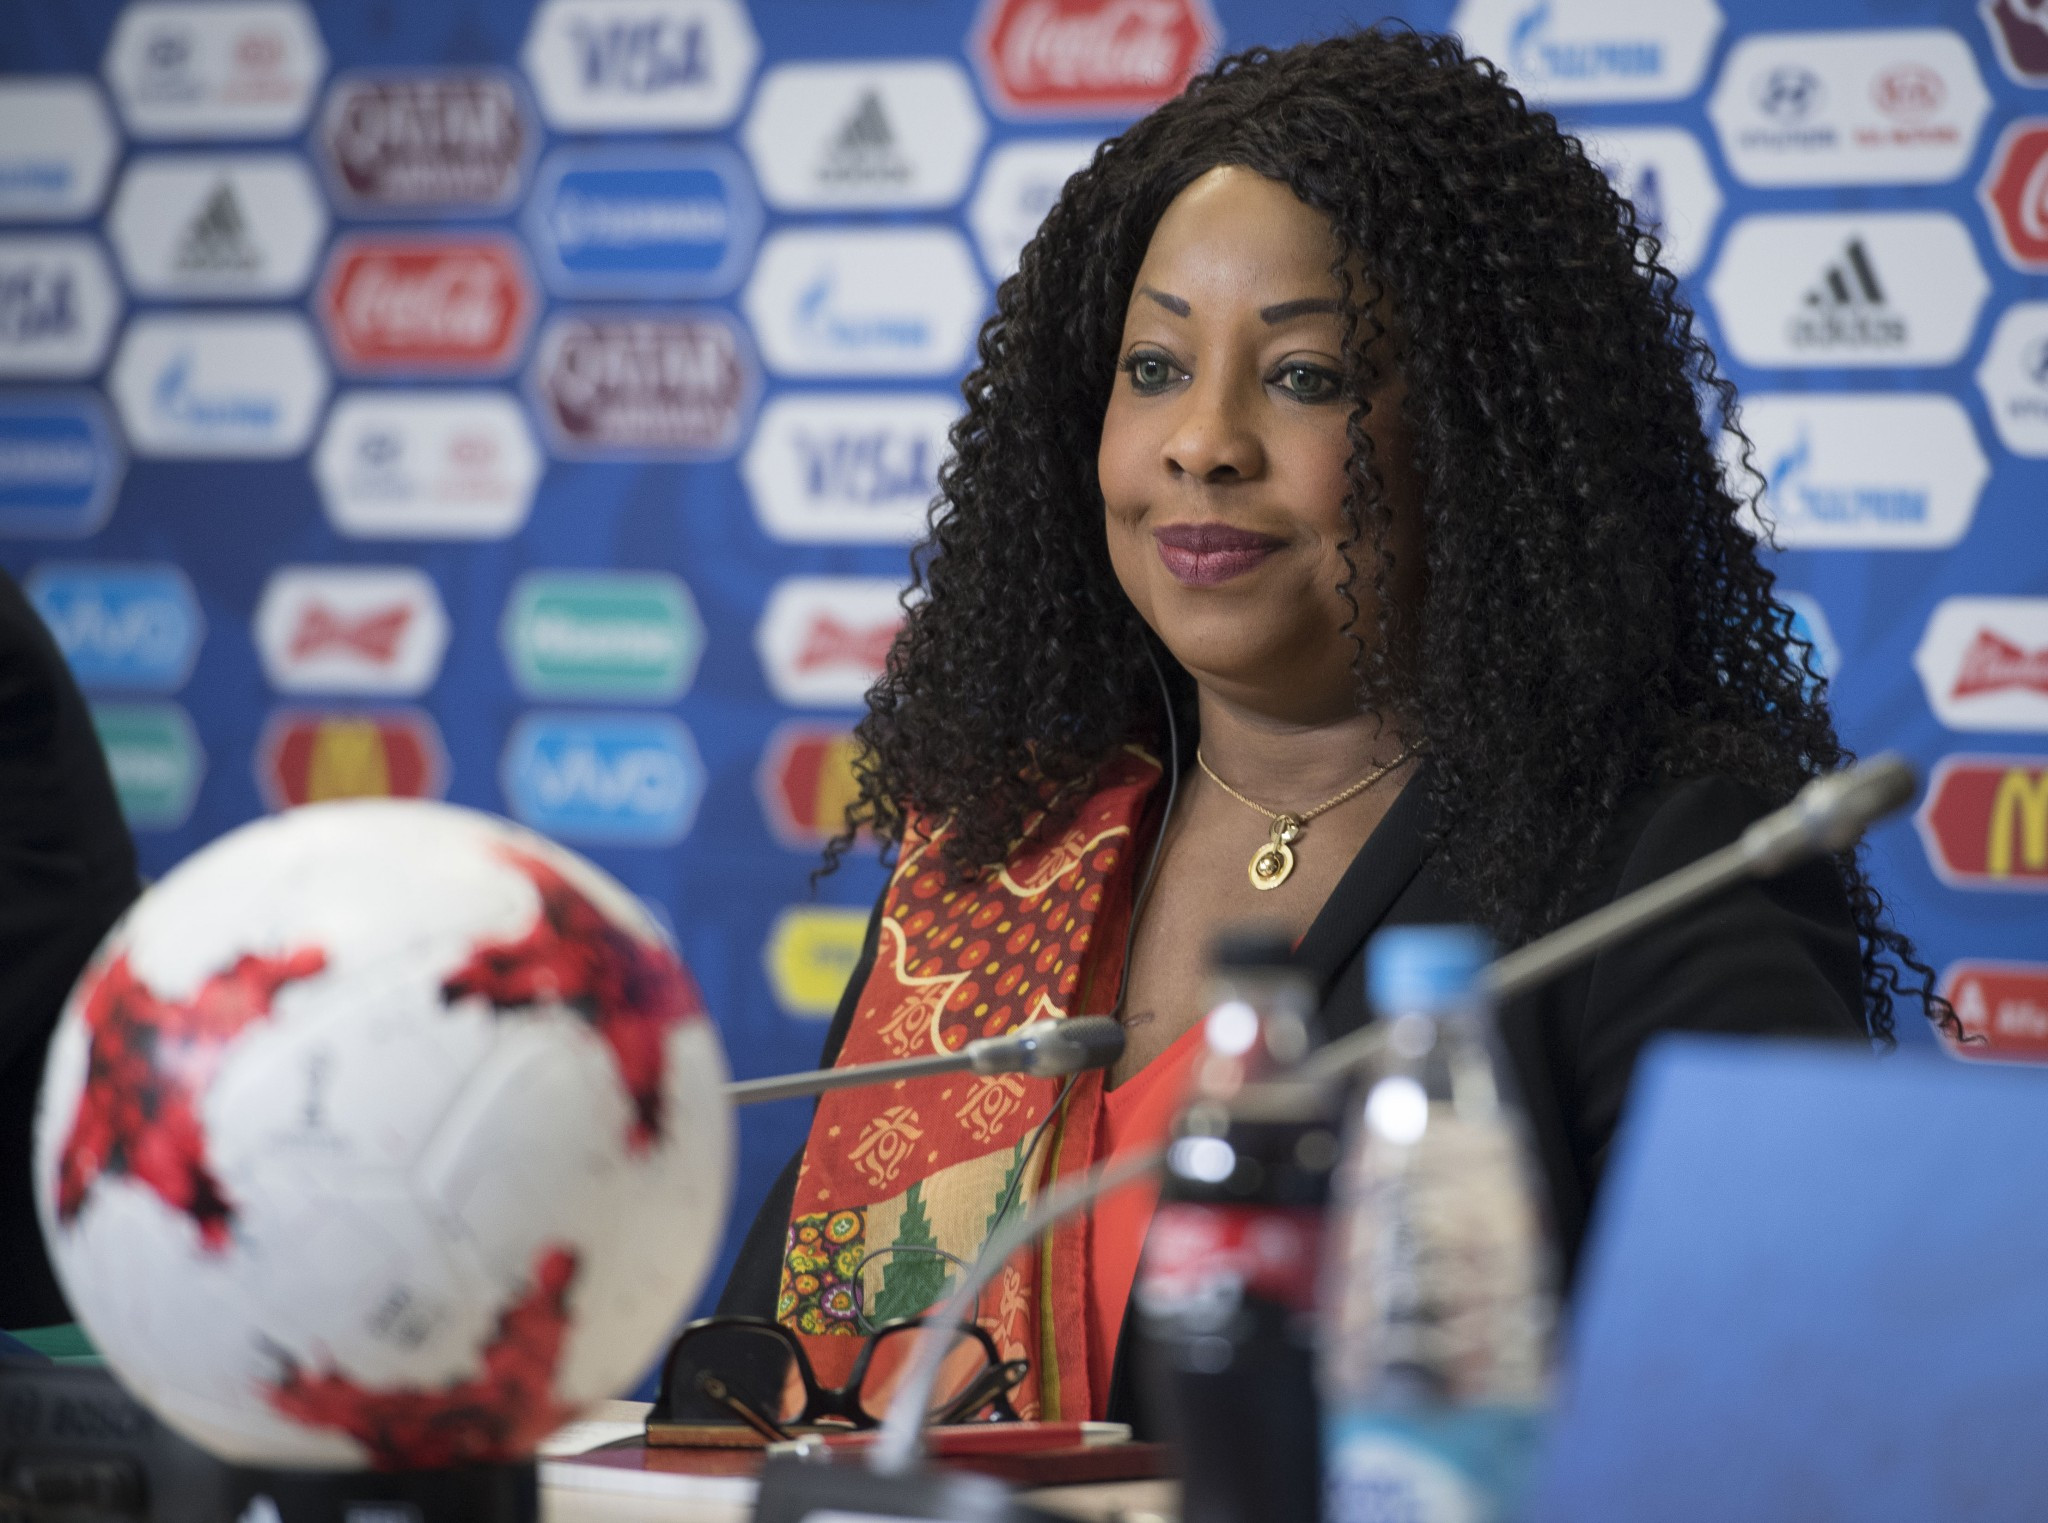 FFA secretary general Fatma Samoura warned banning Vitaly Mutko from standing would be a disaster for the 2018 World Cup and Gianni Infantino's Presidency ©Getty Images